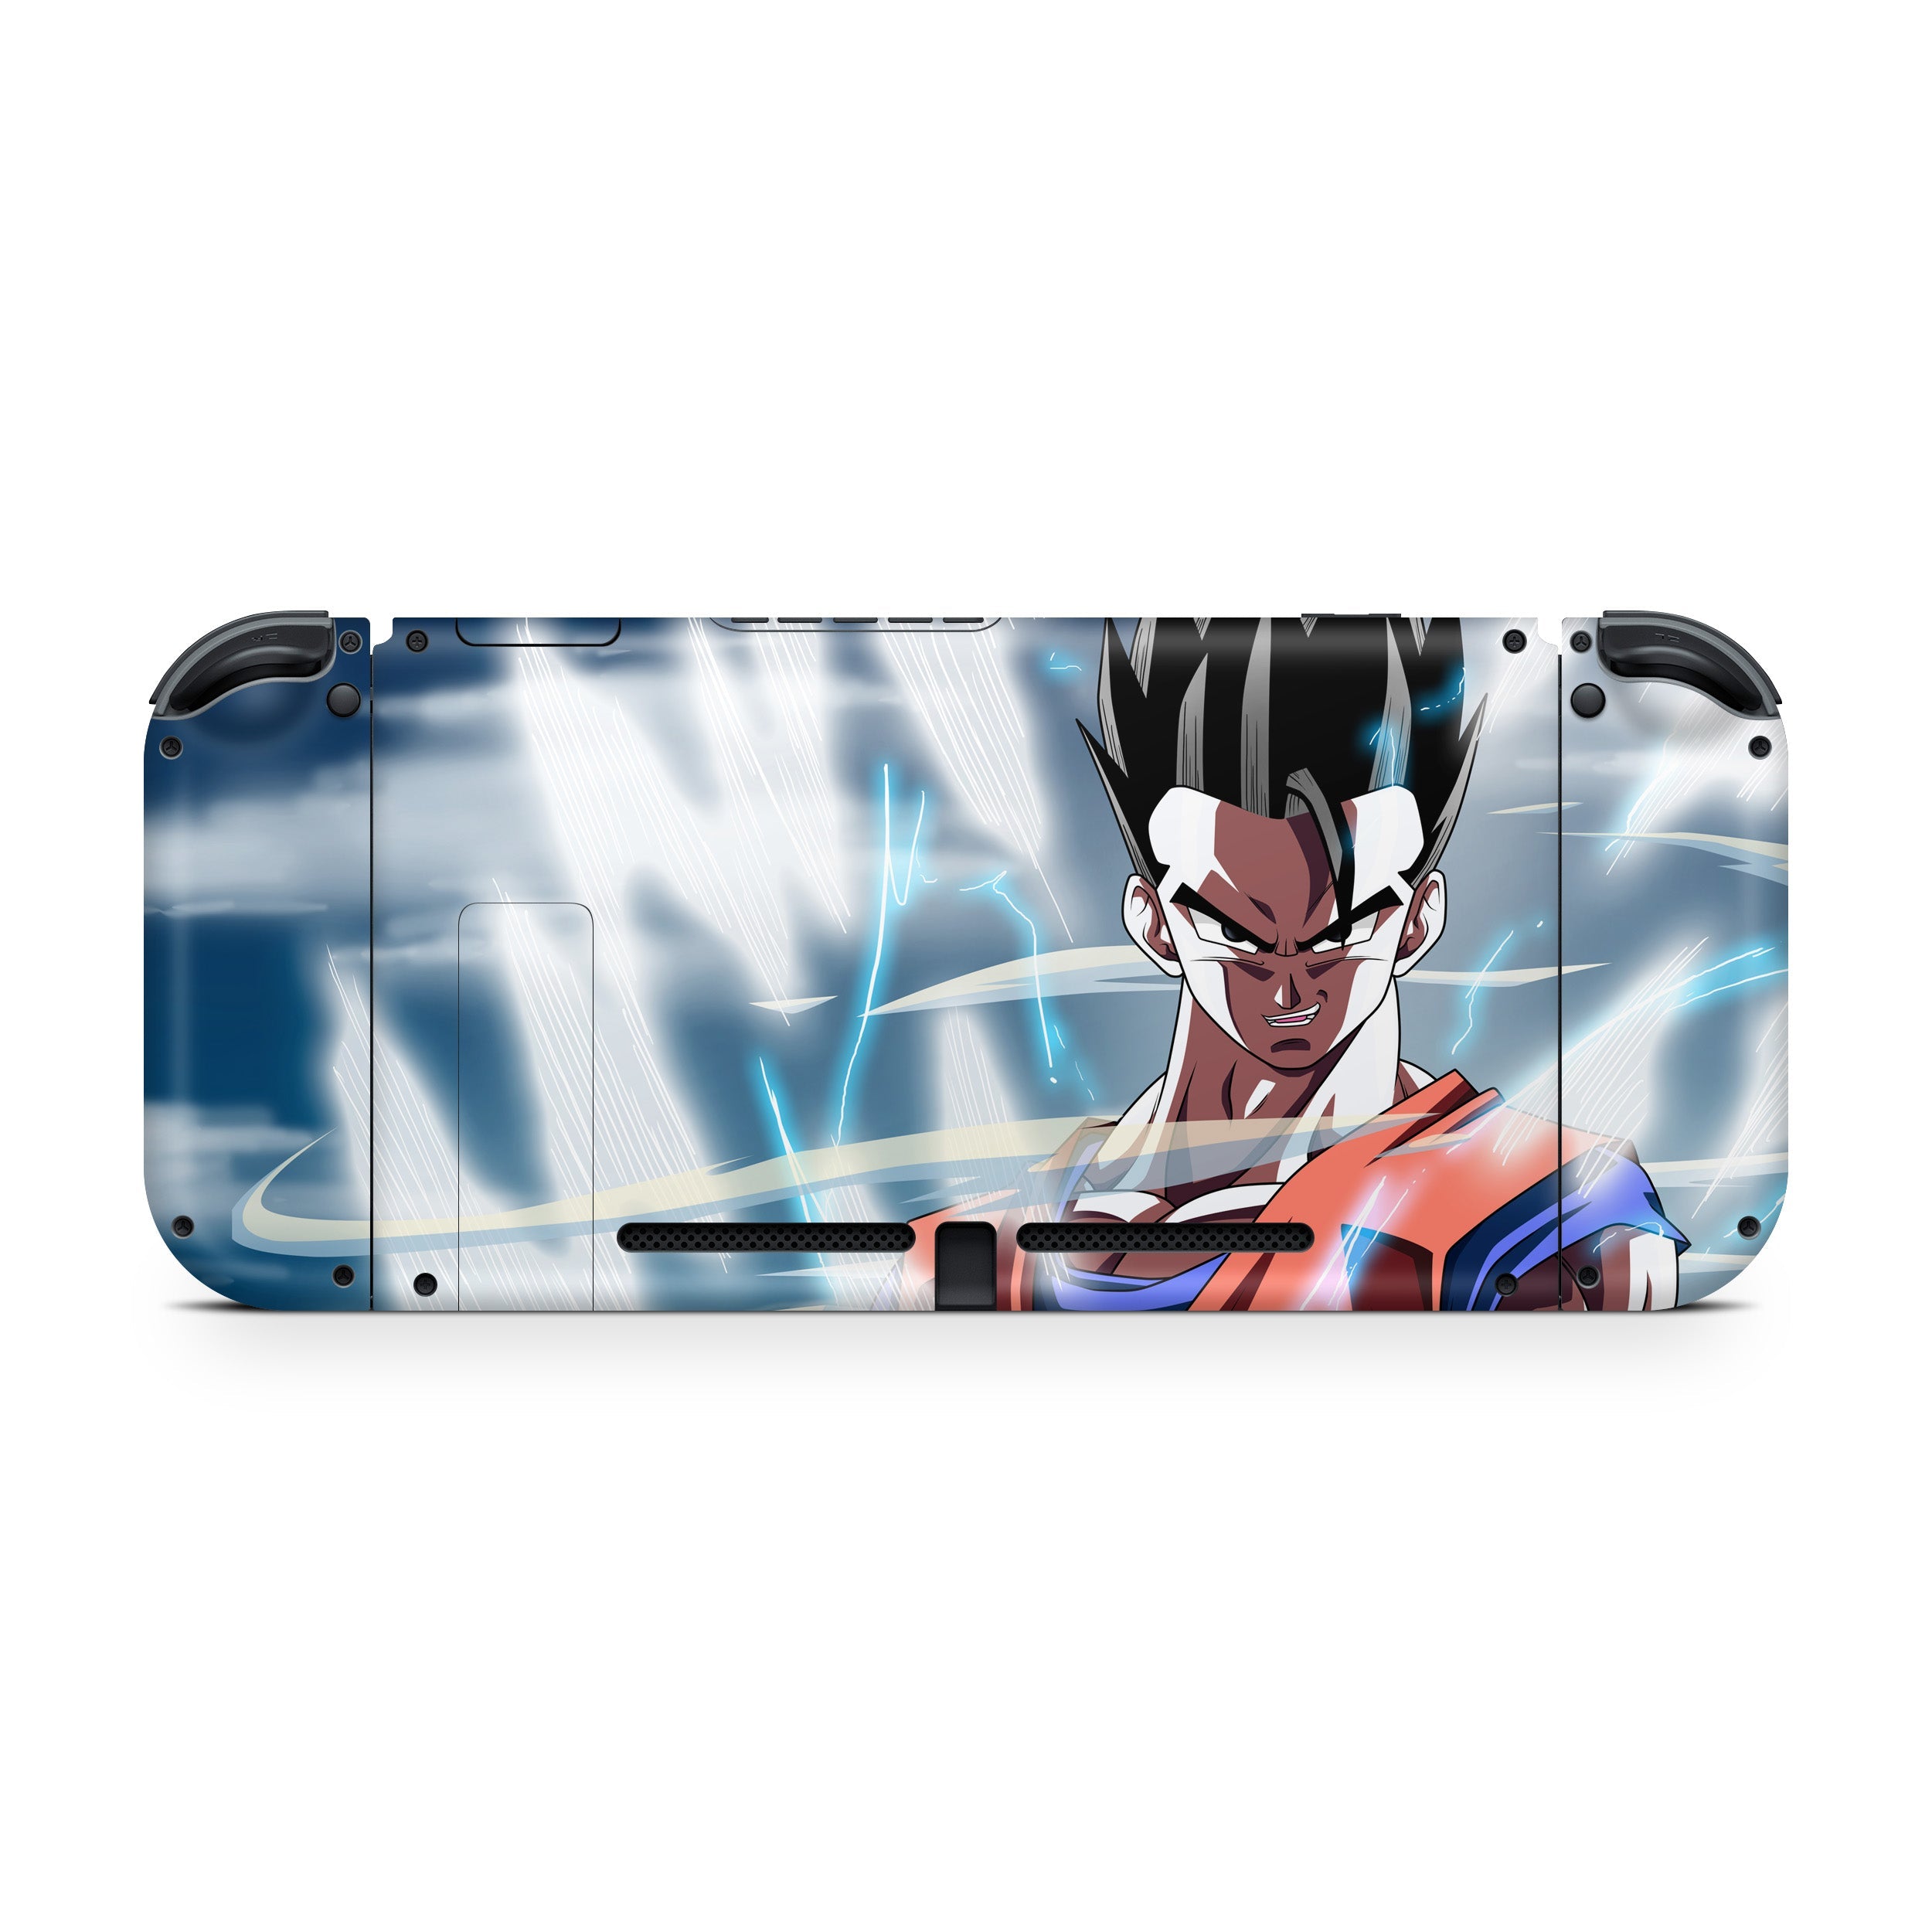 A video game skin featuring a Dragon Ball Z Gohan design for the Nintendo Switch.